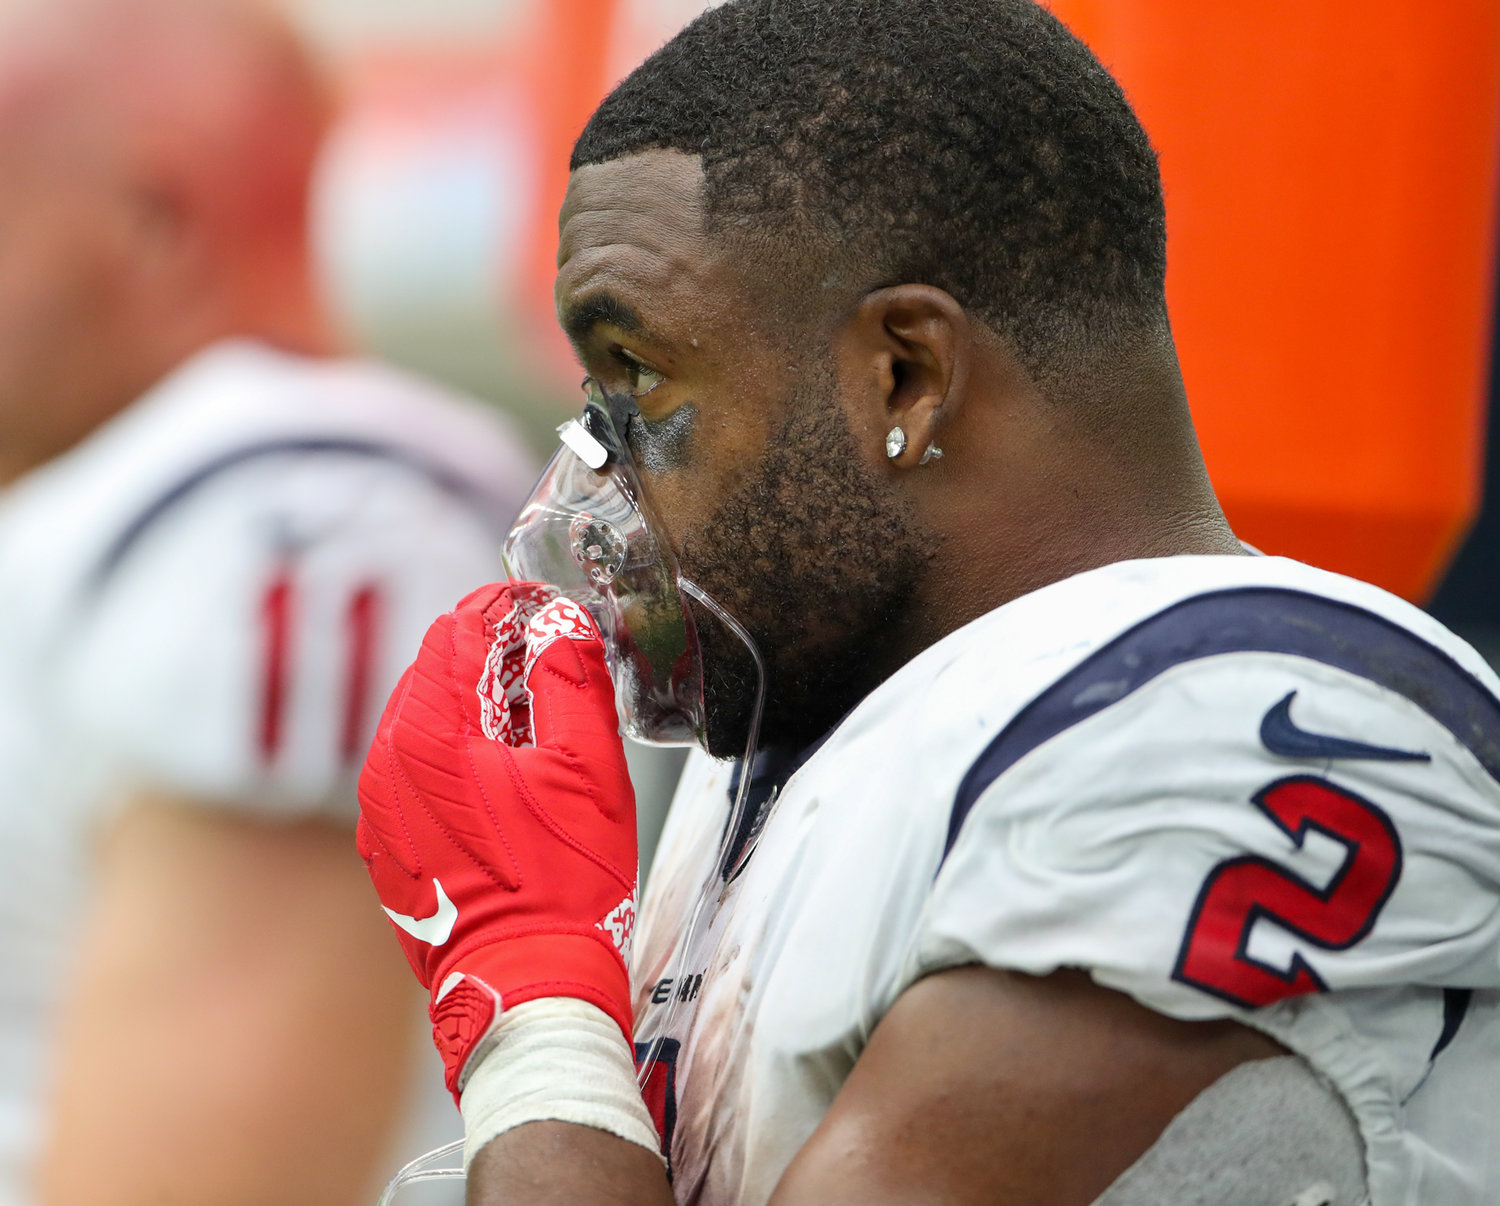 Houston Texans running back Mark Ingram (2) gets oxygen on the sideline during the second half of an NFL game between the Houston Texans and the Jacksonville Jaguars on September 12, 2021 in Houston, Texas.